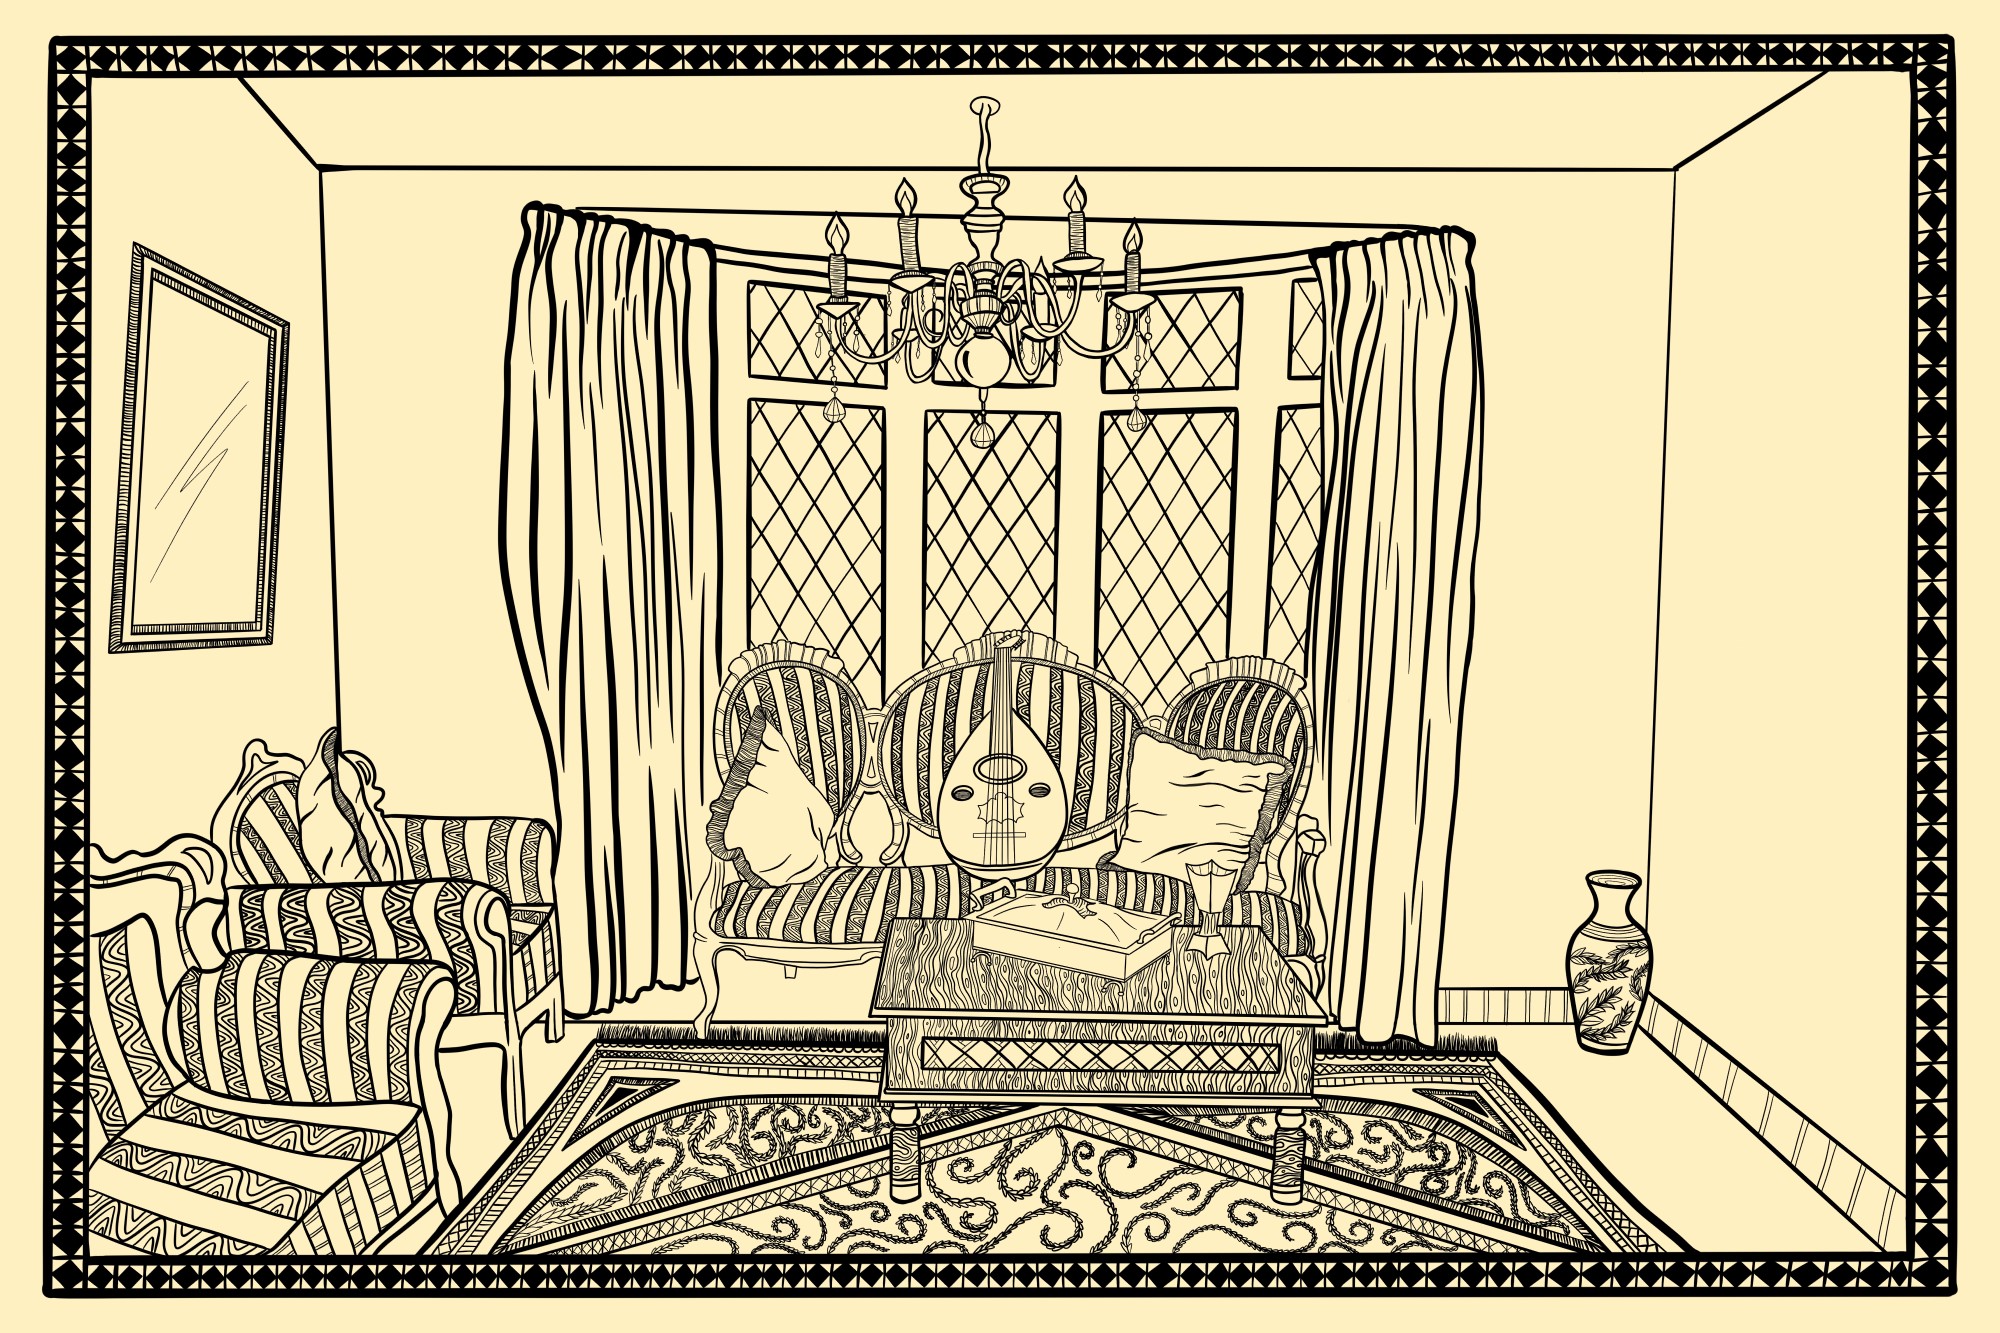 An illustration of a comforting, adorned living room. Two striped couches join together around a carpet and table. An oud among pillows on one couch.